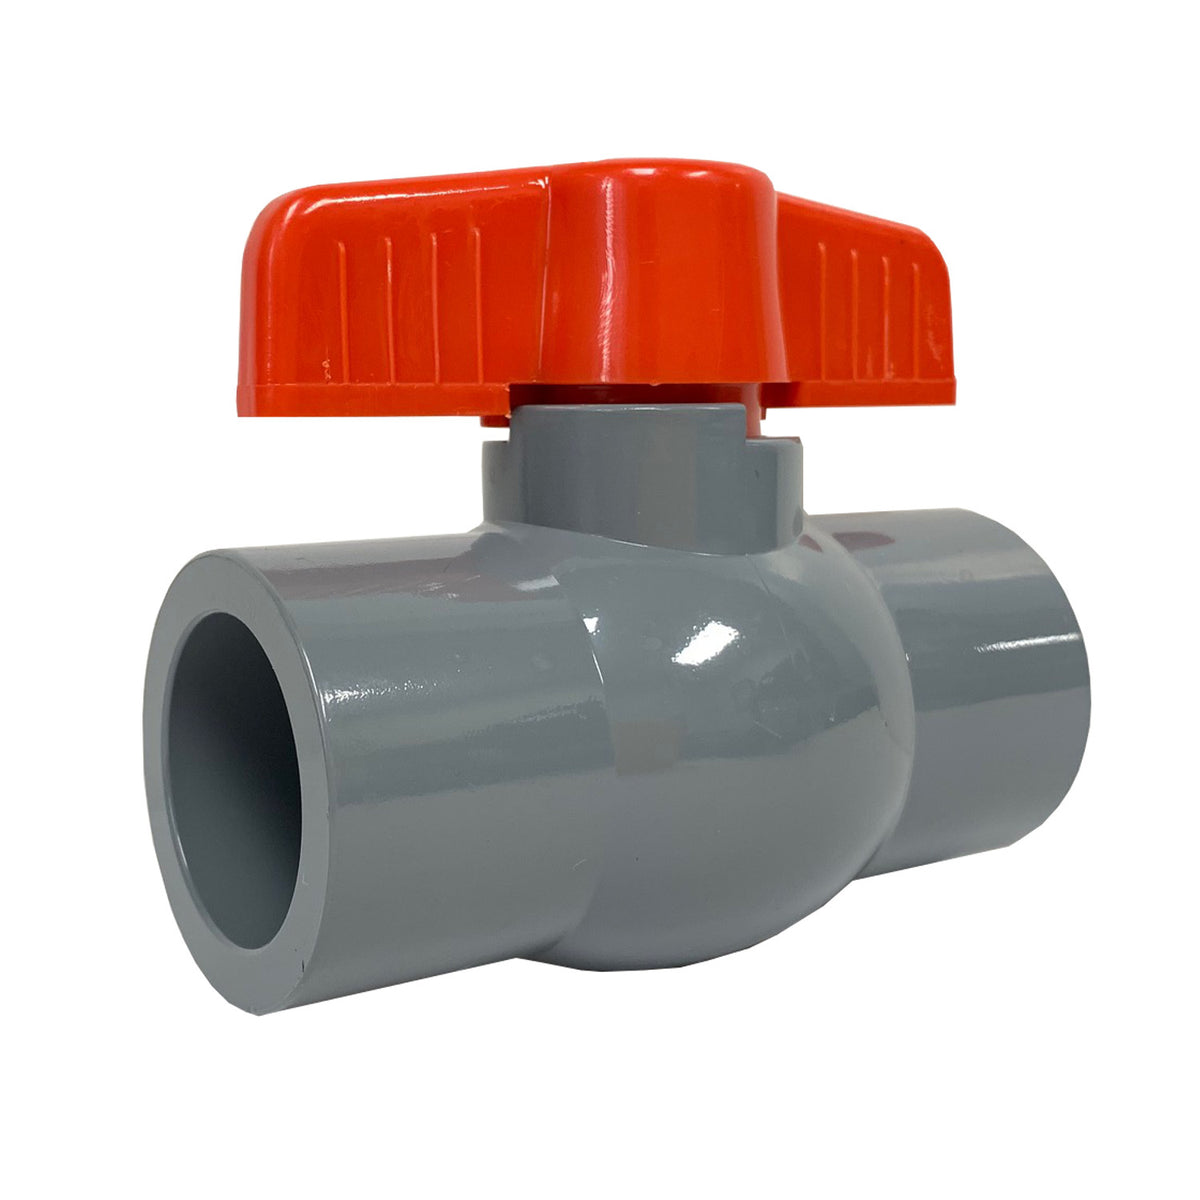 2 Inch Schedule 80 CPVC Compact Ball Valve, Socket Connect